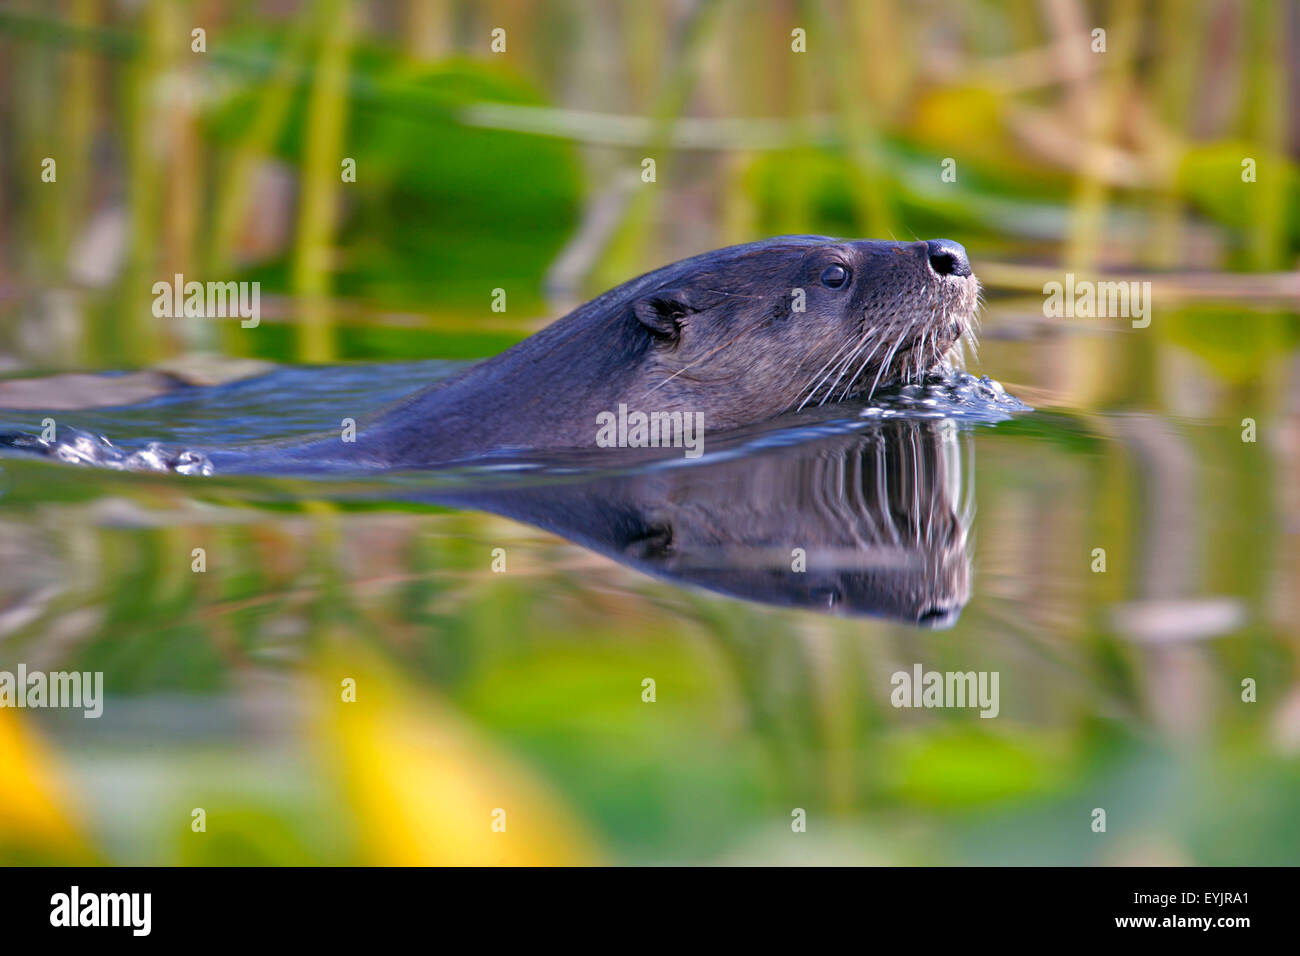 River Otter swimming in lake, closeup head reflecting in water. Stock Photo